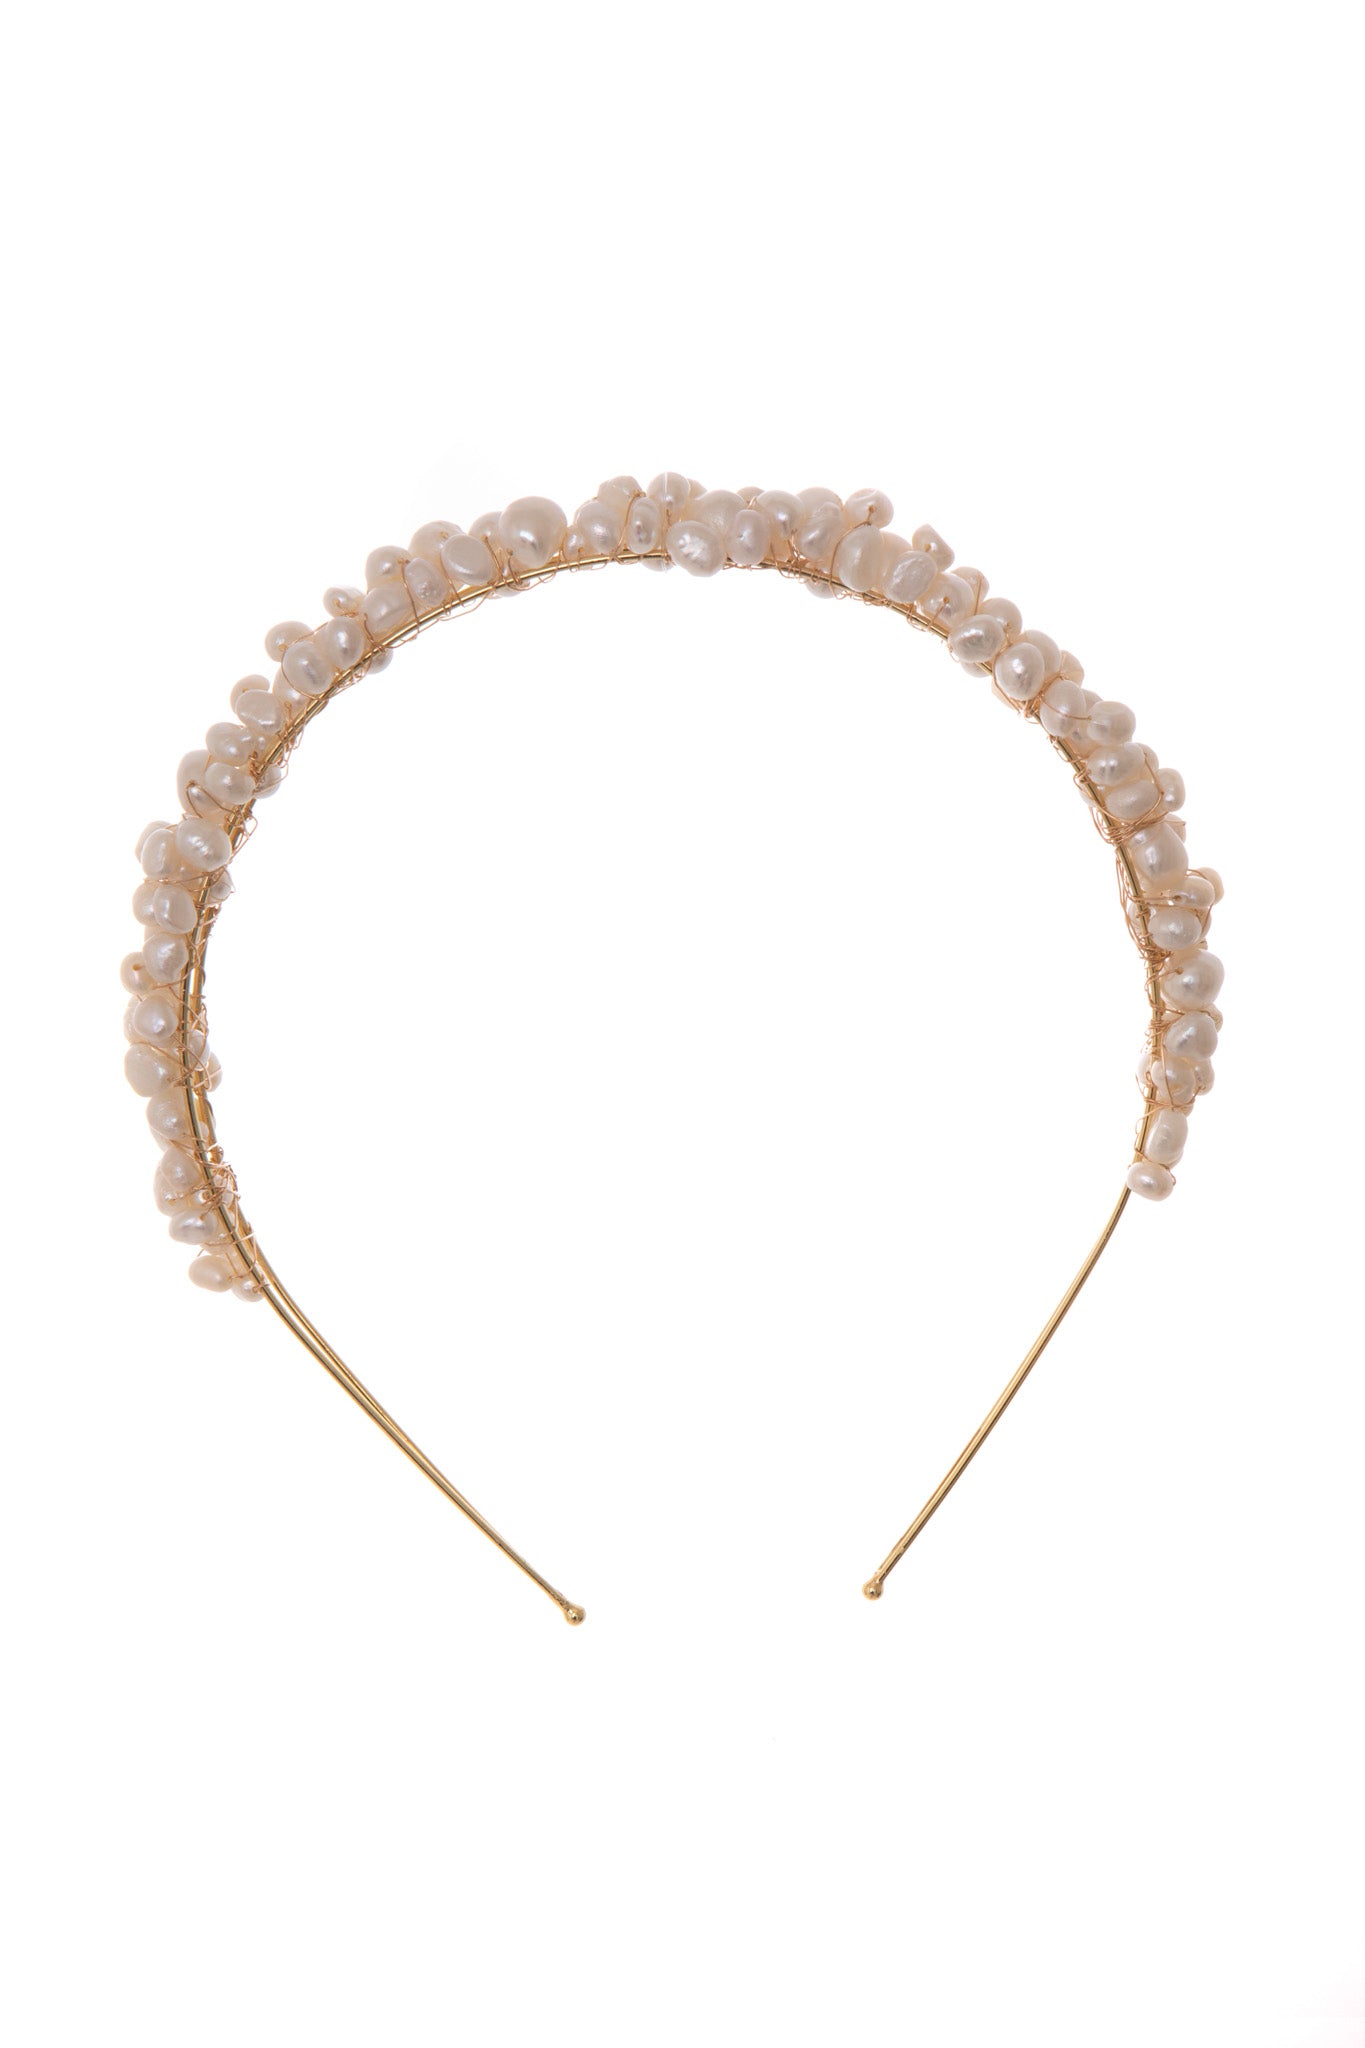 Pearls never fail to create an air of elegant femininity. This headband is the perfect contemporary piece for any bridal moment.